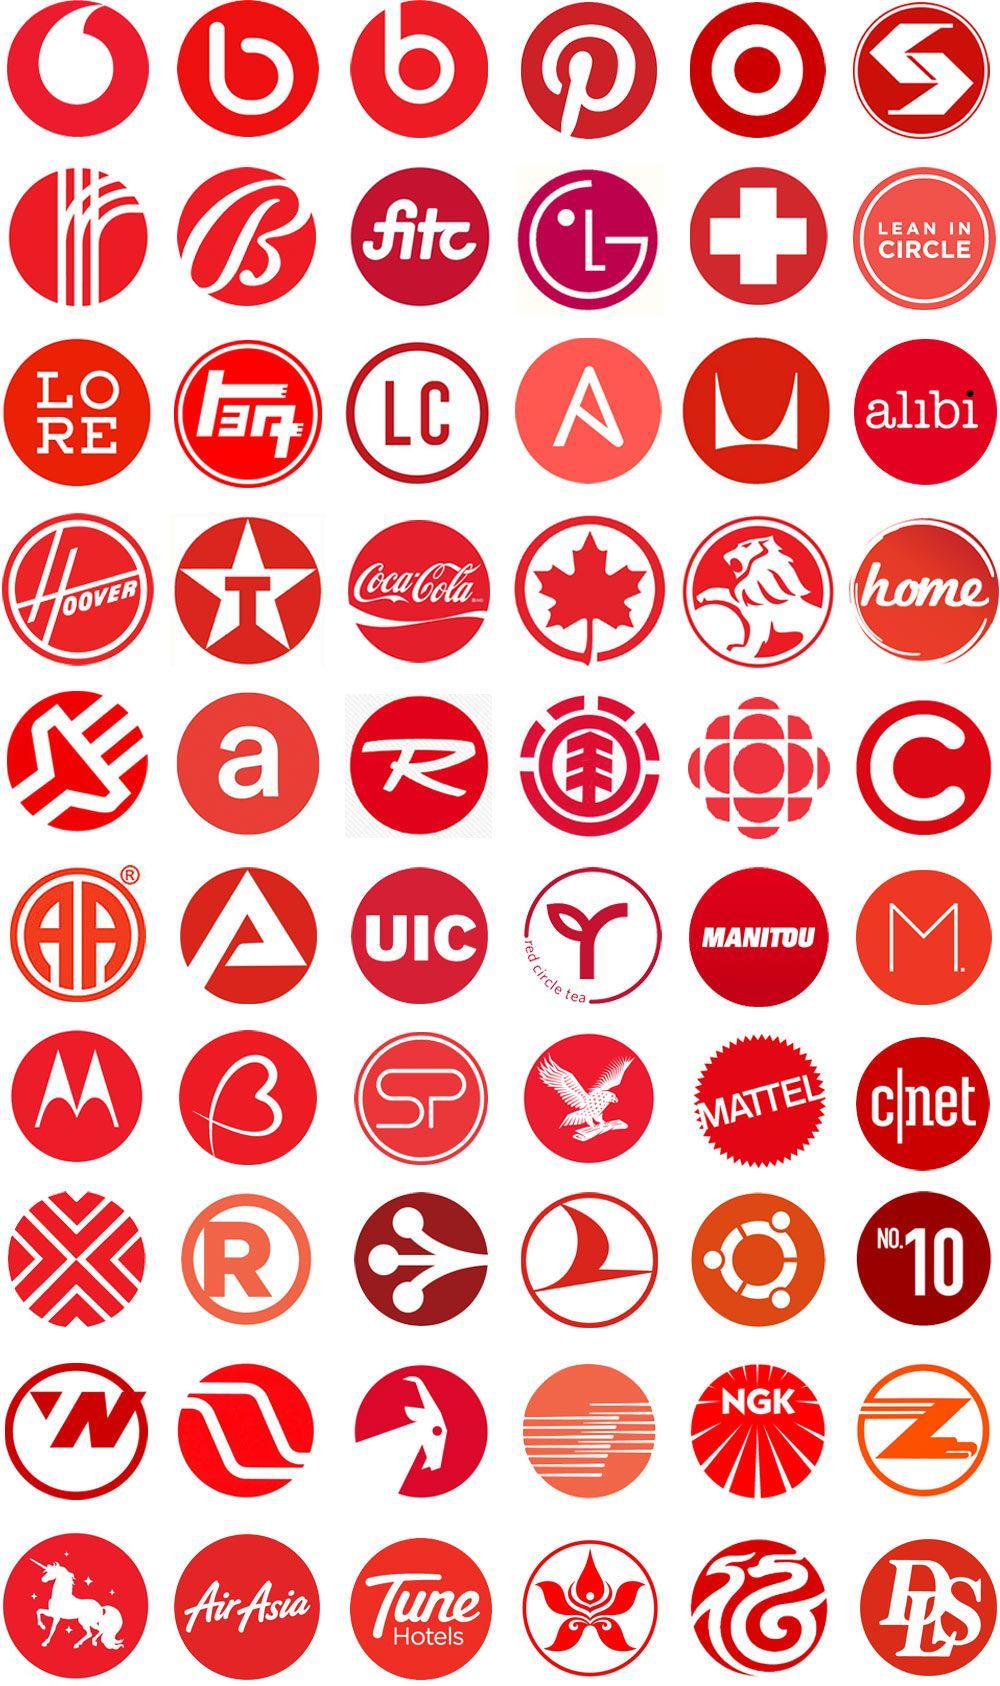 Red and White Logo - Of course it's been done before | Logos | Pinterest | Logo design ...